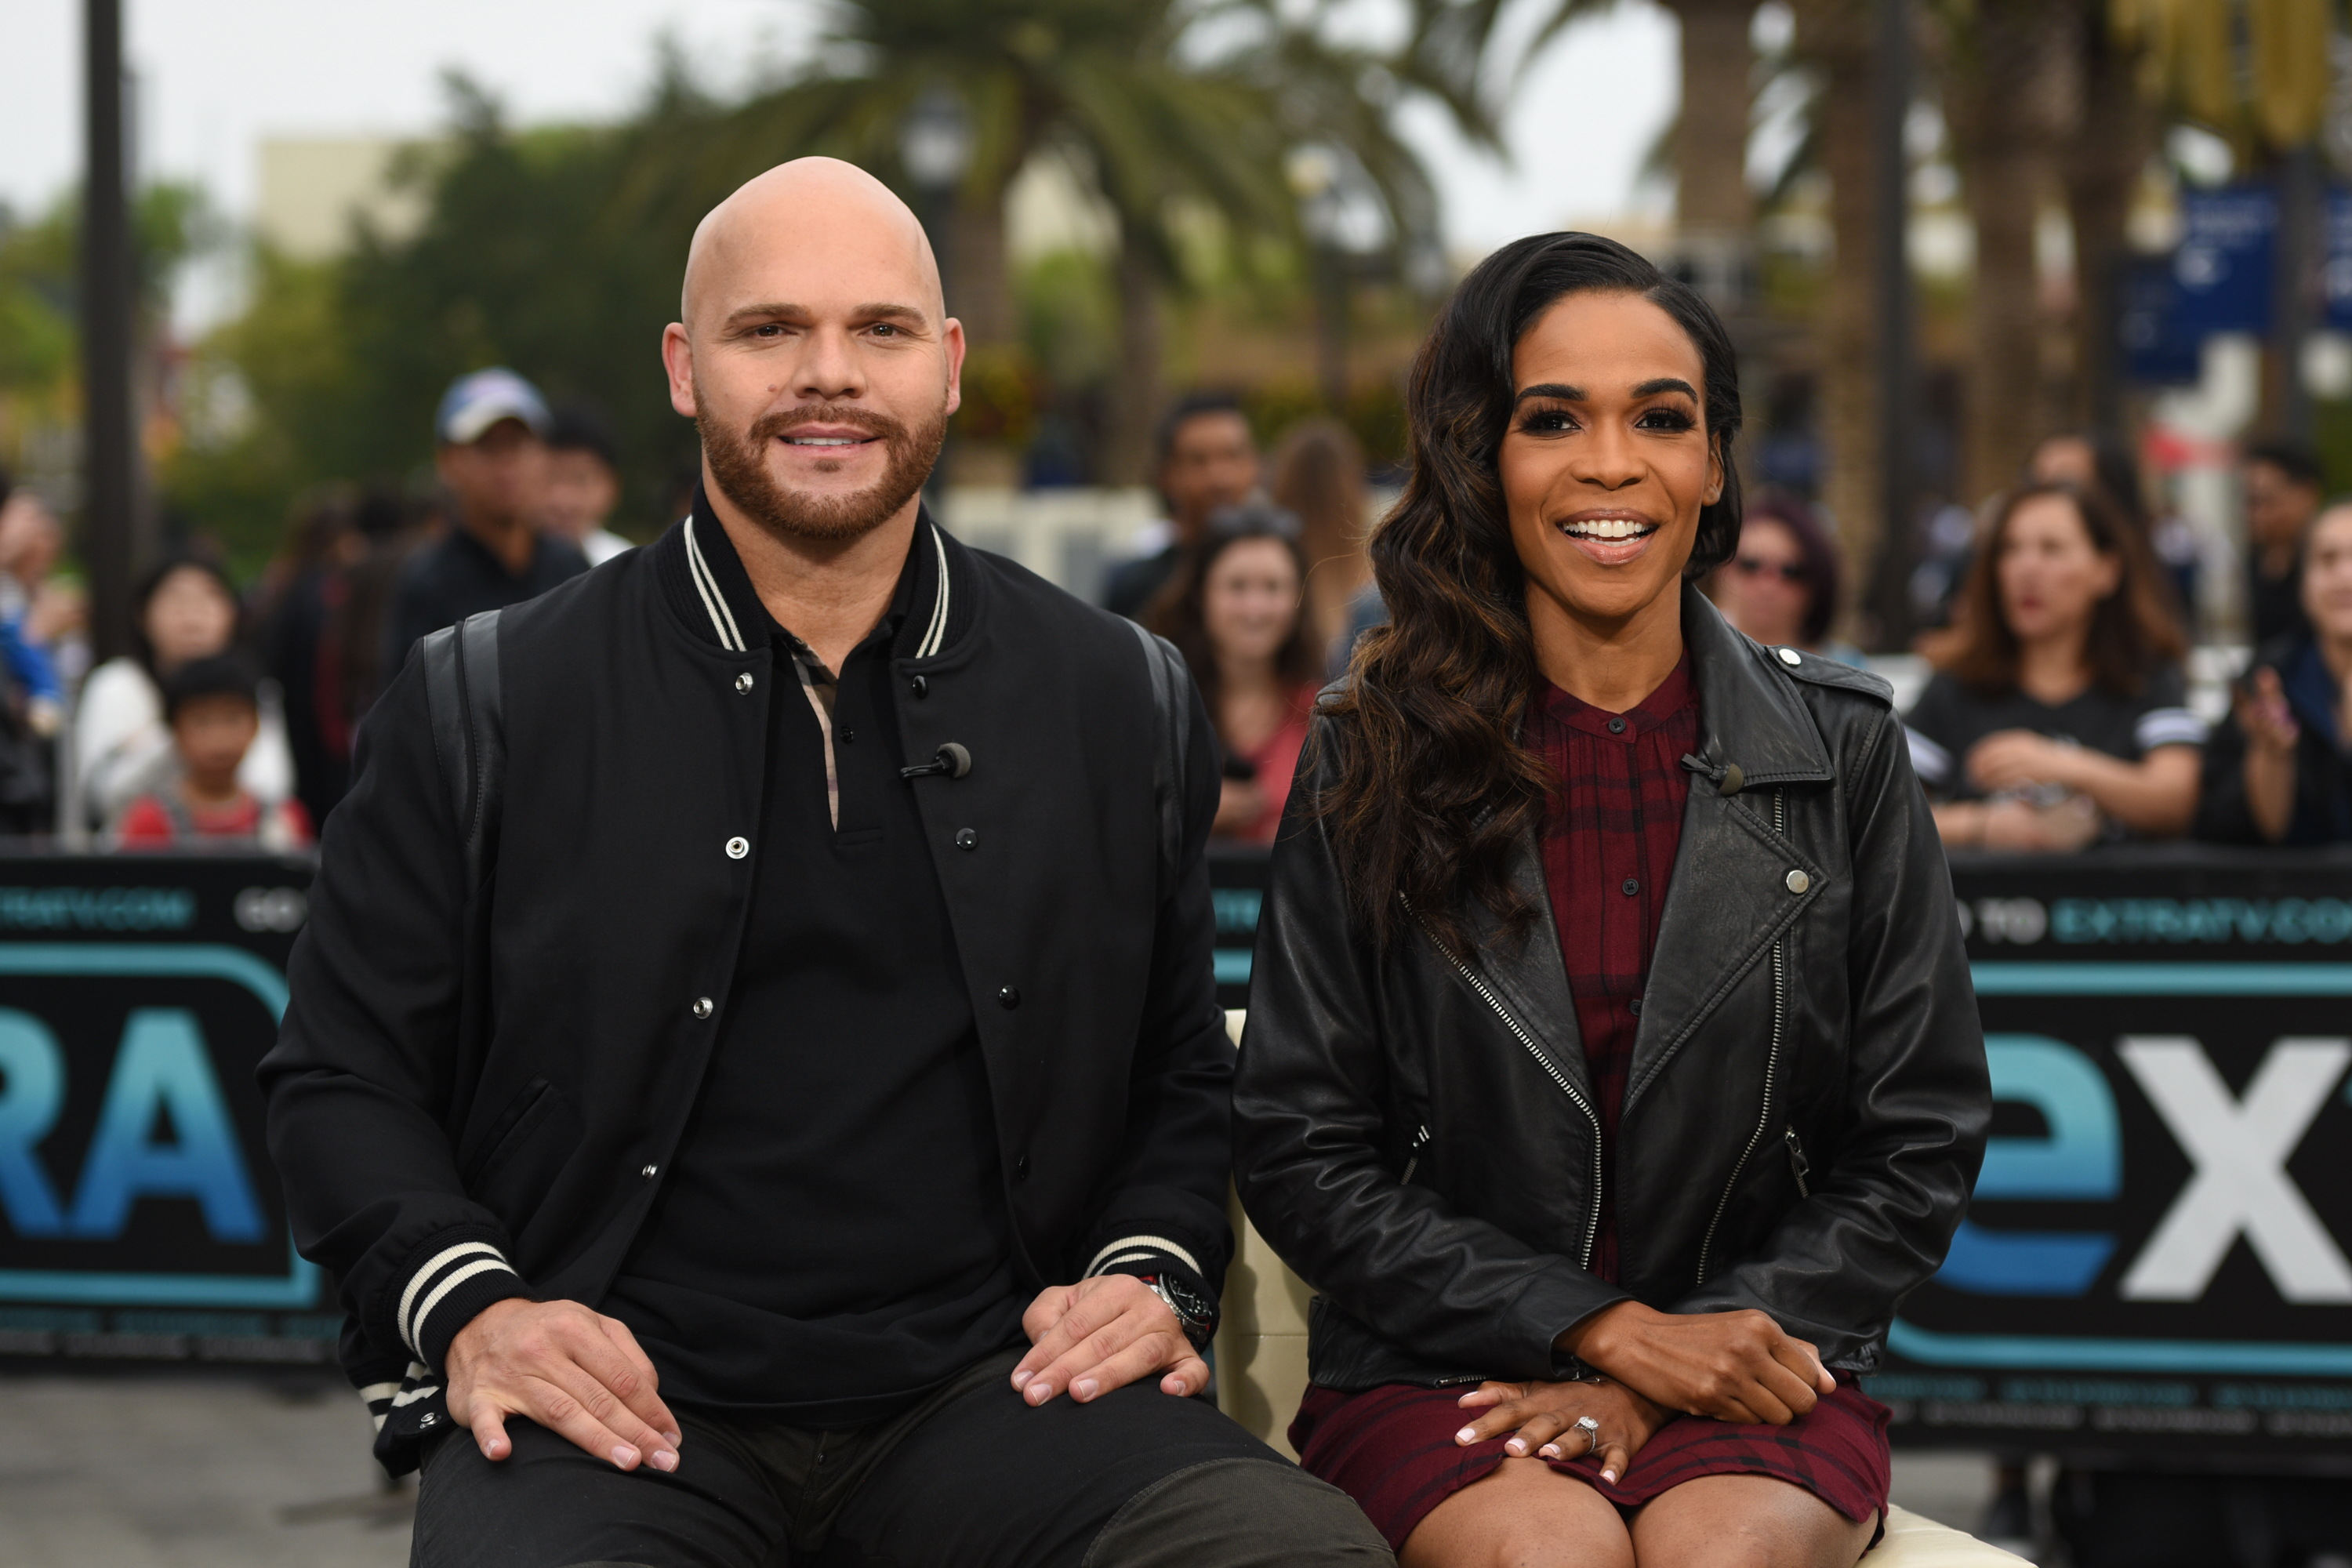 <p>Destiny's Child singer <a href="https://www.wonderwall.com/celebrity/profiles/overview/michelle-williams-357.article">Michelle Williams</a> got engaged to pastor and life coach Chad Johnson in March 2018, one year after they met at an Elevate International spiritual retreat in Arizona that he was running, she told People magazine. They hit it off right away, but neither pursued a romance during the retreat. "I mean, he was cute," Michelle told People, "but I did not go to flirt with the pastor!" They did, however, keep in touch afterward. "I tried to roll in with some mac daddy game and I tried to flirt a little bit and said something like, 'How about you and I connect sometime?' And right away, she texted right back with one word and six question marks behind it: 'Connect??????'" Chad, who's worked as a chaplain for pro sports teams including the Pittsburgh Steelers, told People. "I thought she had dissed me. So I was embarrassed and I didn't reach back out to her because I thought I'd ruined the friendship." Nope. A week later, Michelle slid into his DMs on Instagram and soon they were sharing late-night FaceTime calls. "We spent almost three months without even seeing each other, just building a strong foundation on the phone and through FaceTime; it was really built on friendship and communication," Chad explained. They shared their first kiss that July. In late 2018, Michelle announced that they'd called off their engagement and split. Though they appeared to briefly rekindle their romance in the spring of 2019, it ultimately wasn't meant to be.</p>